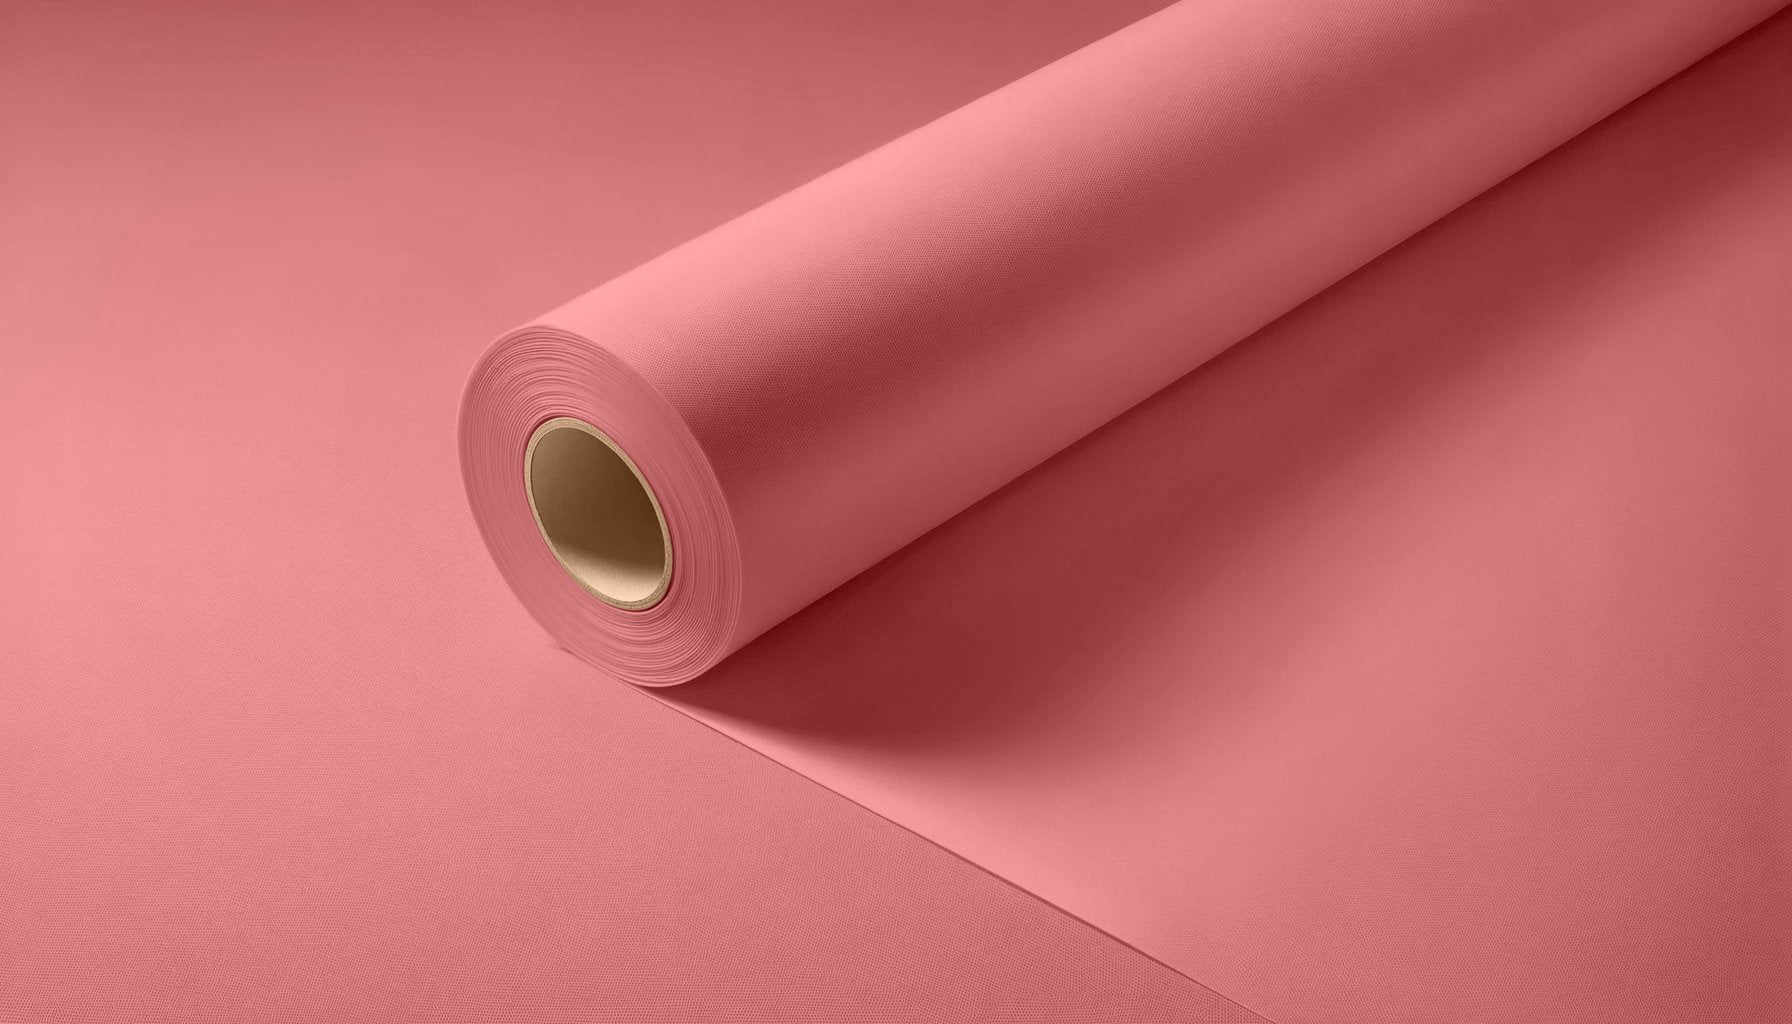 Peel & Stick Removable Re-usable Paint - Color RAL 3014 Antique Pink - offRAL™ - RALRAW LLC, USA